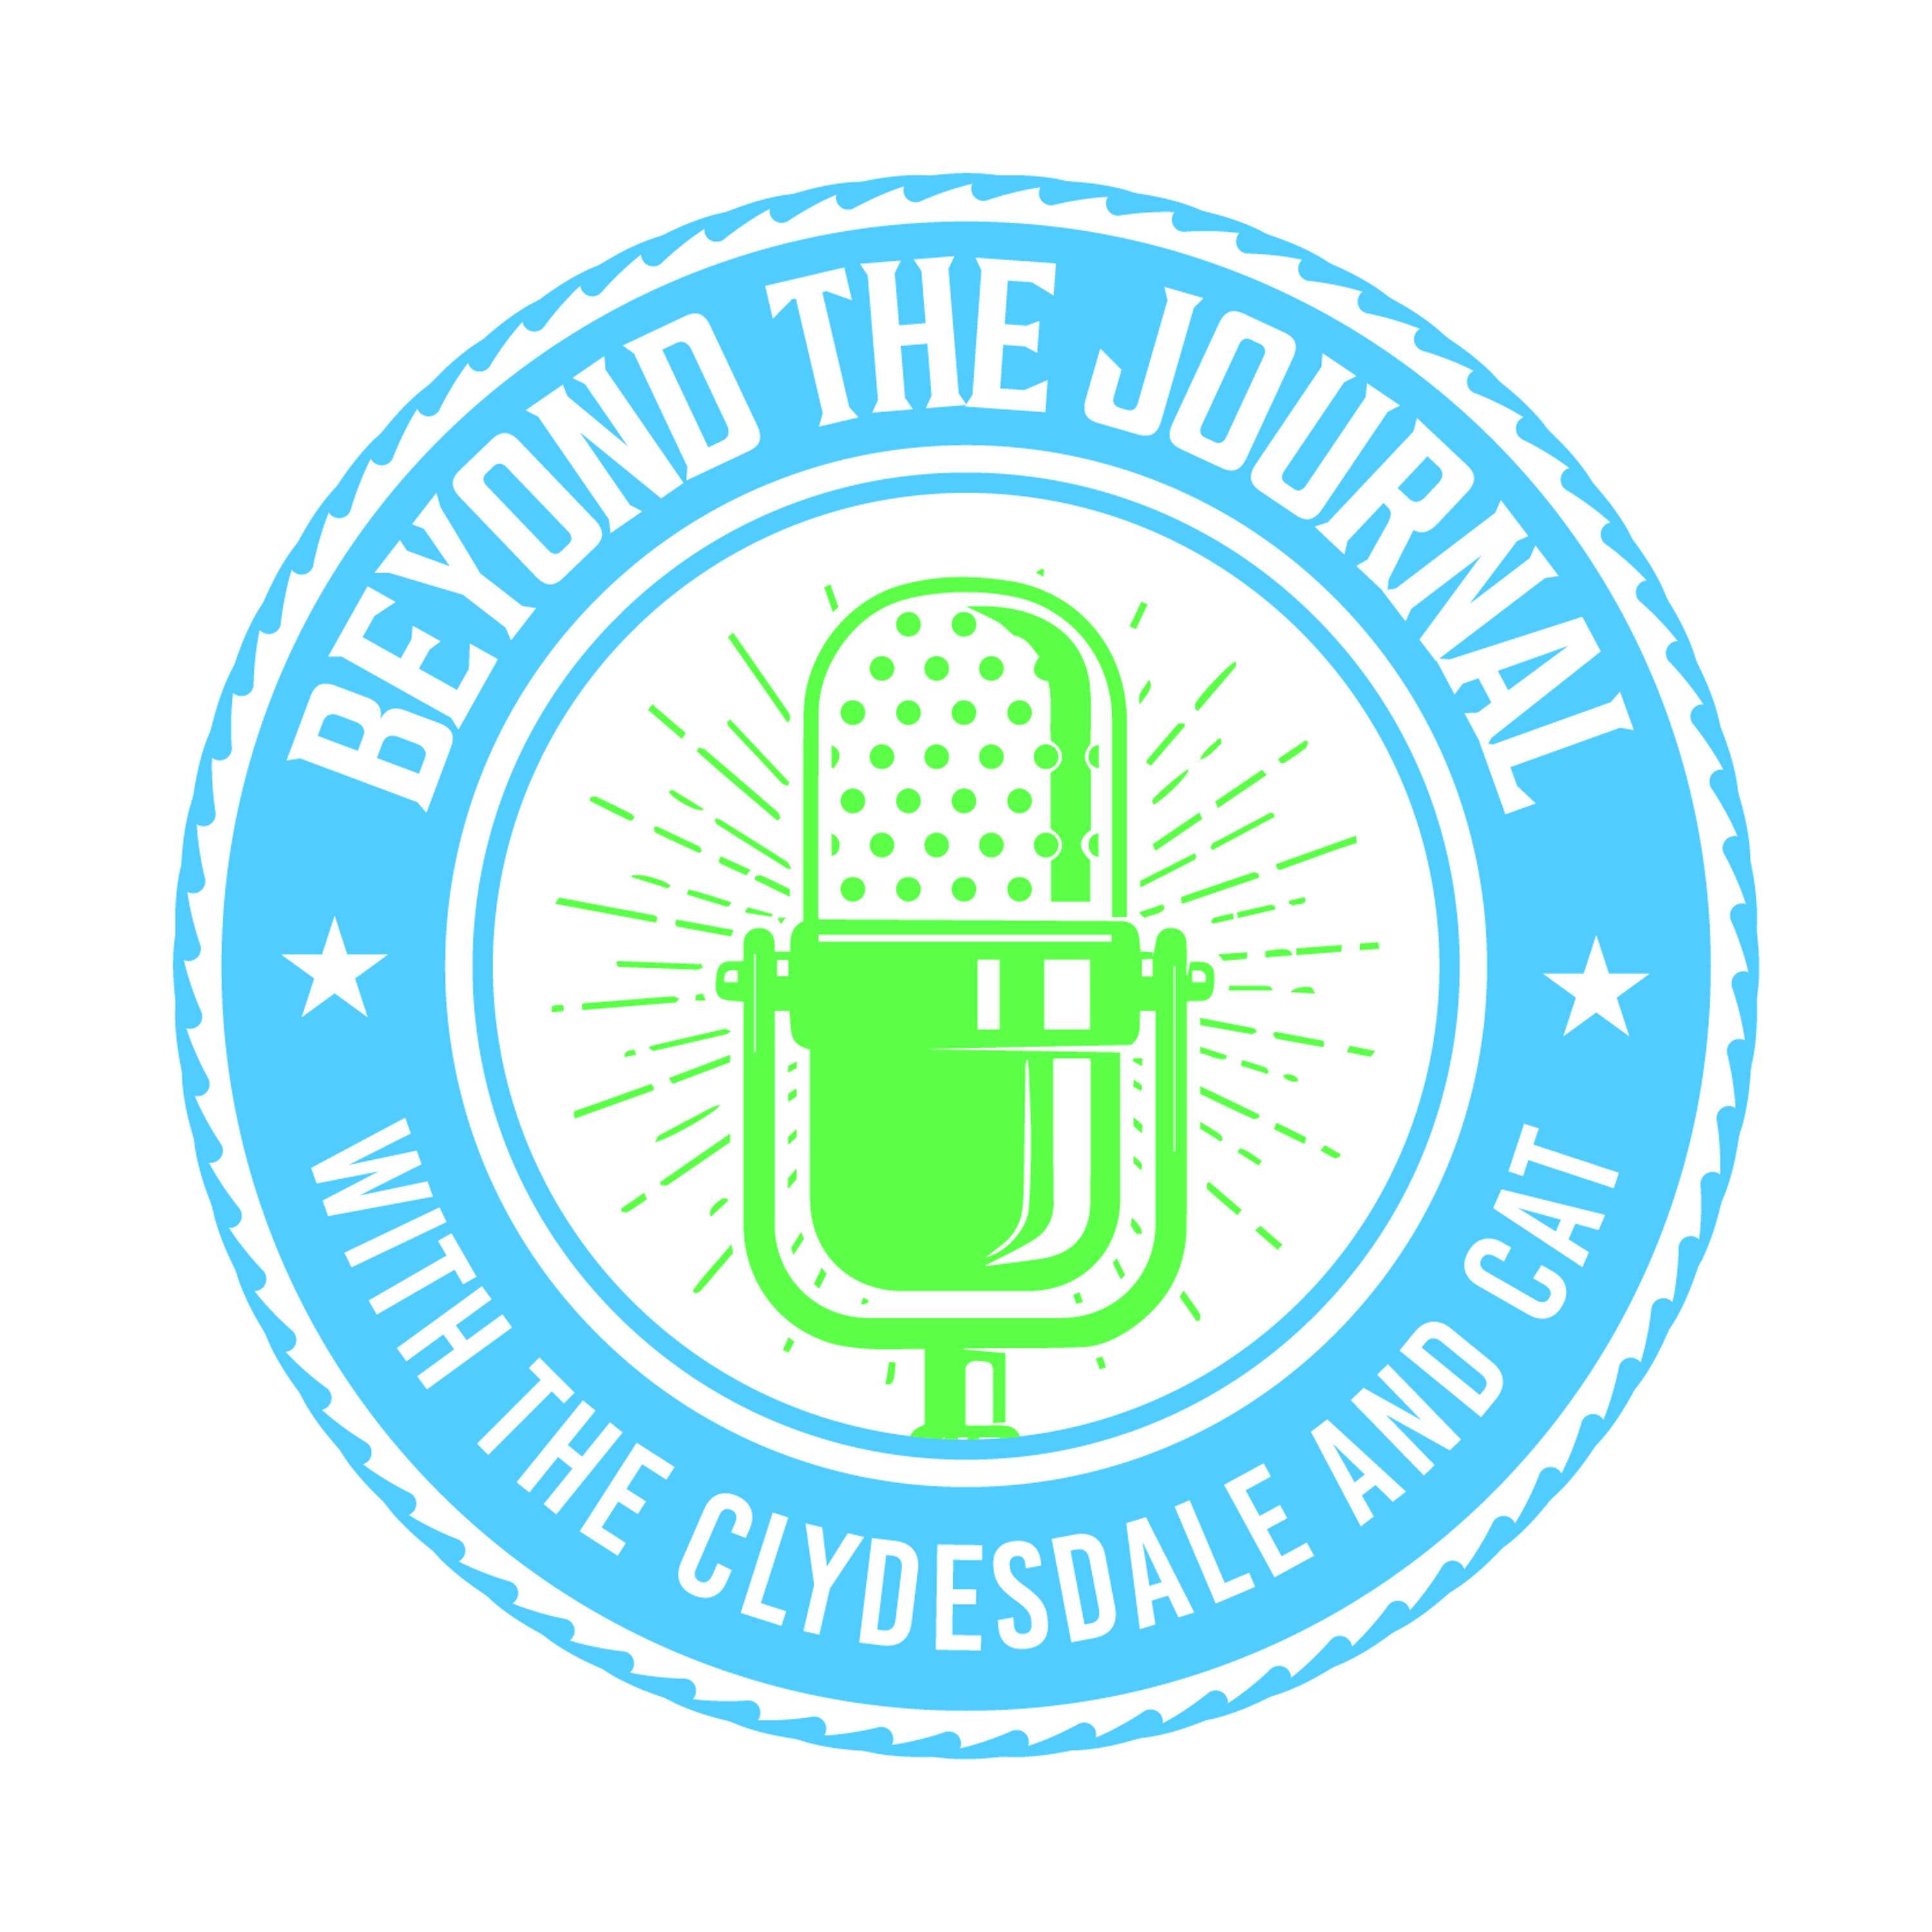 Beyond The Journal With The Clydesdale and Cat